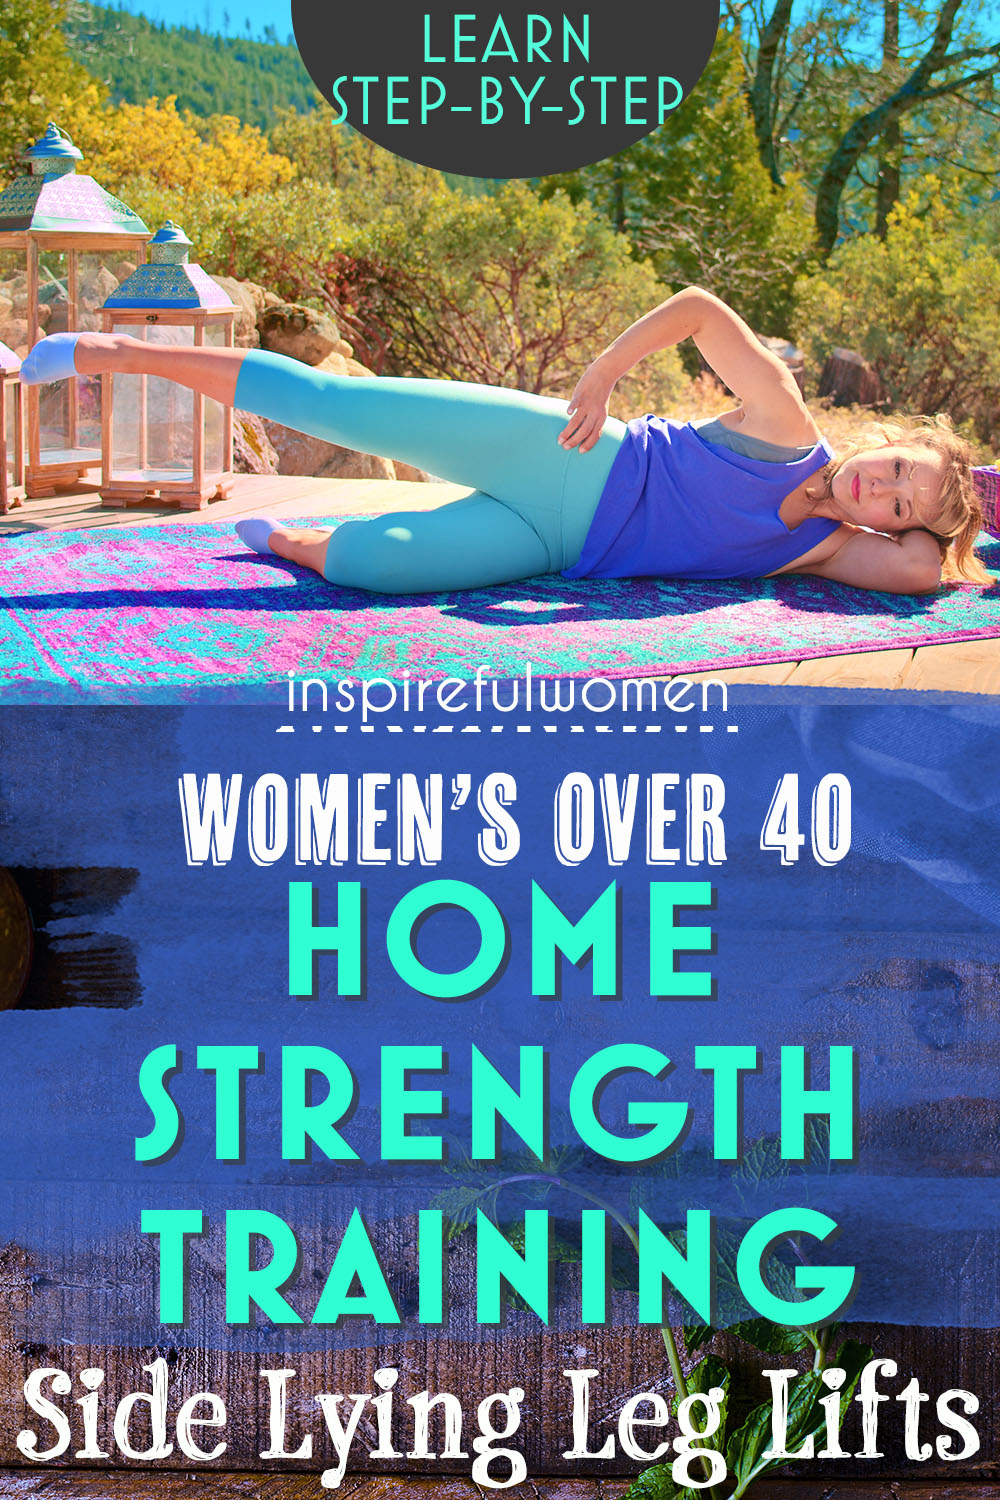 lying-lateral-leg-lifts-bent-leg-glutes-strength-workout-at-home-women-forty-plus